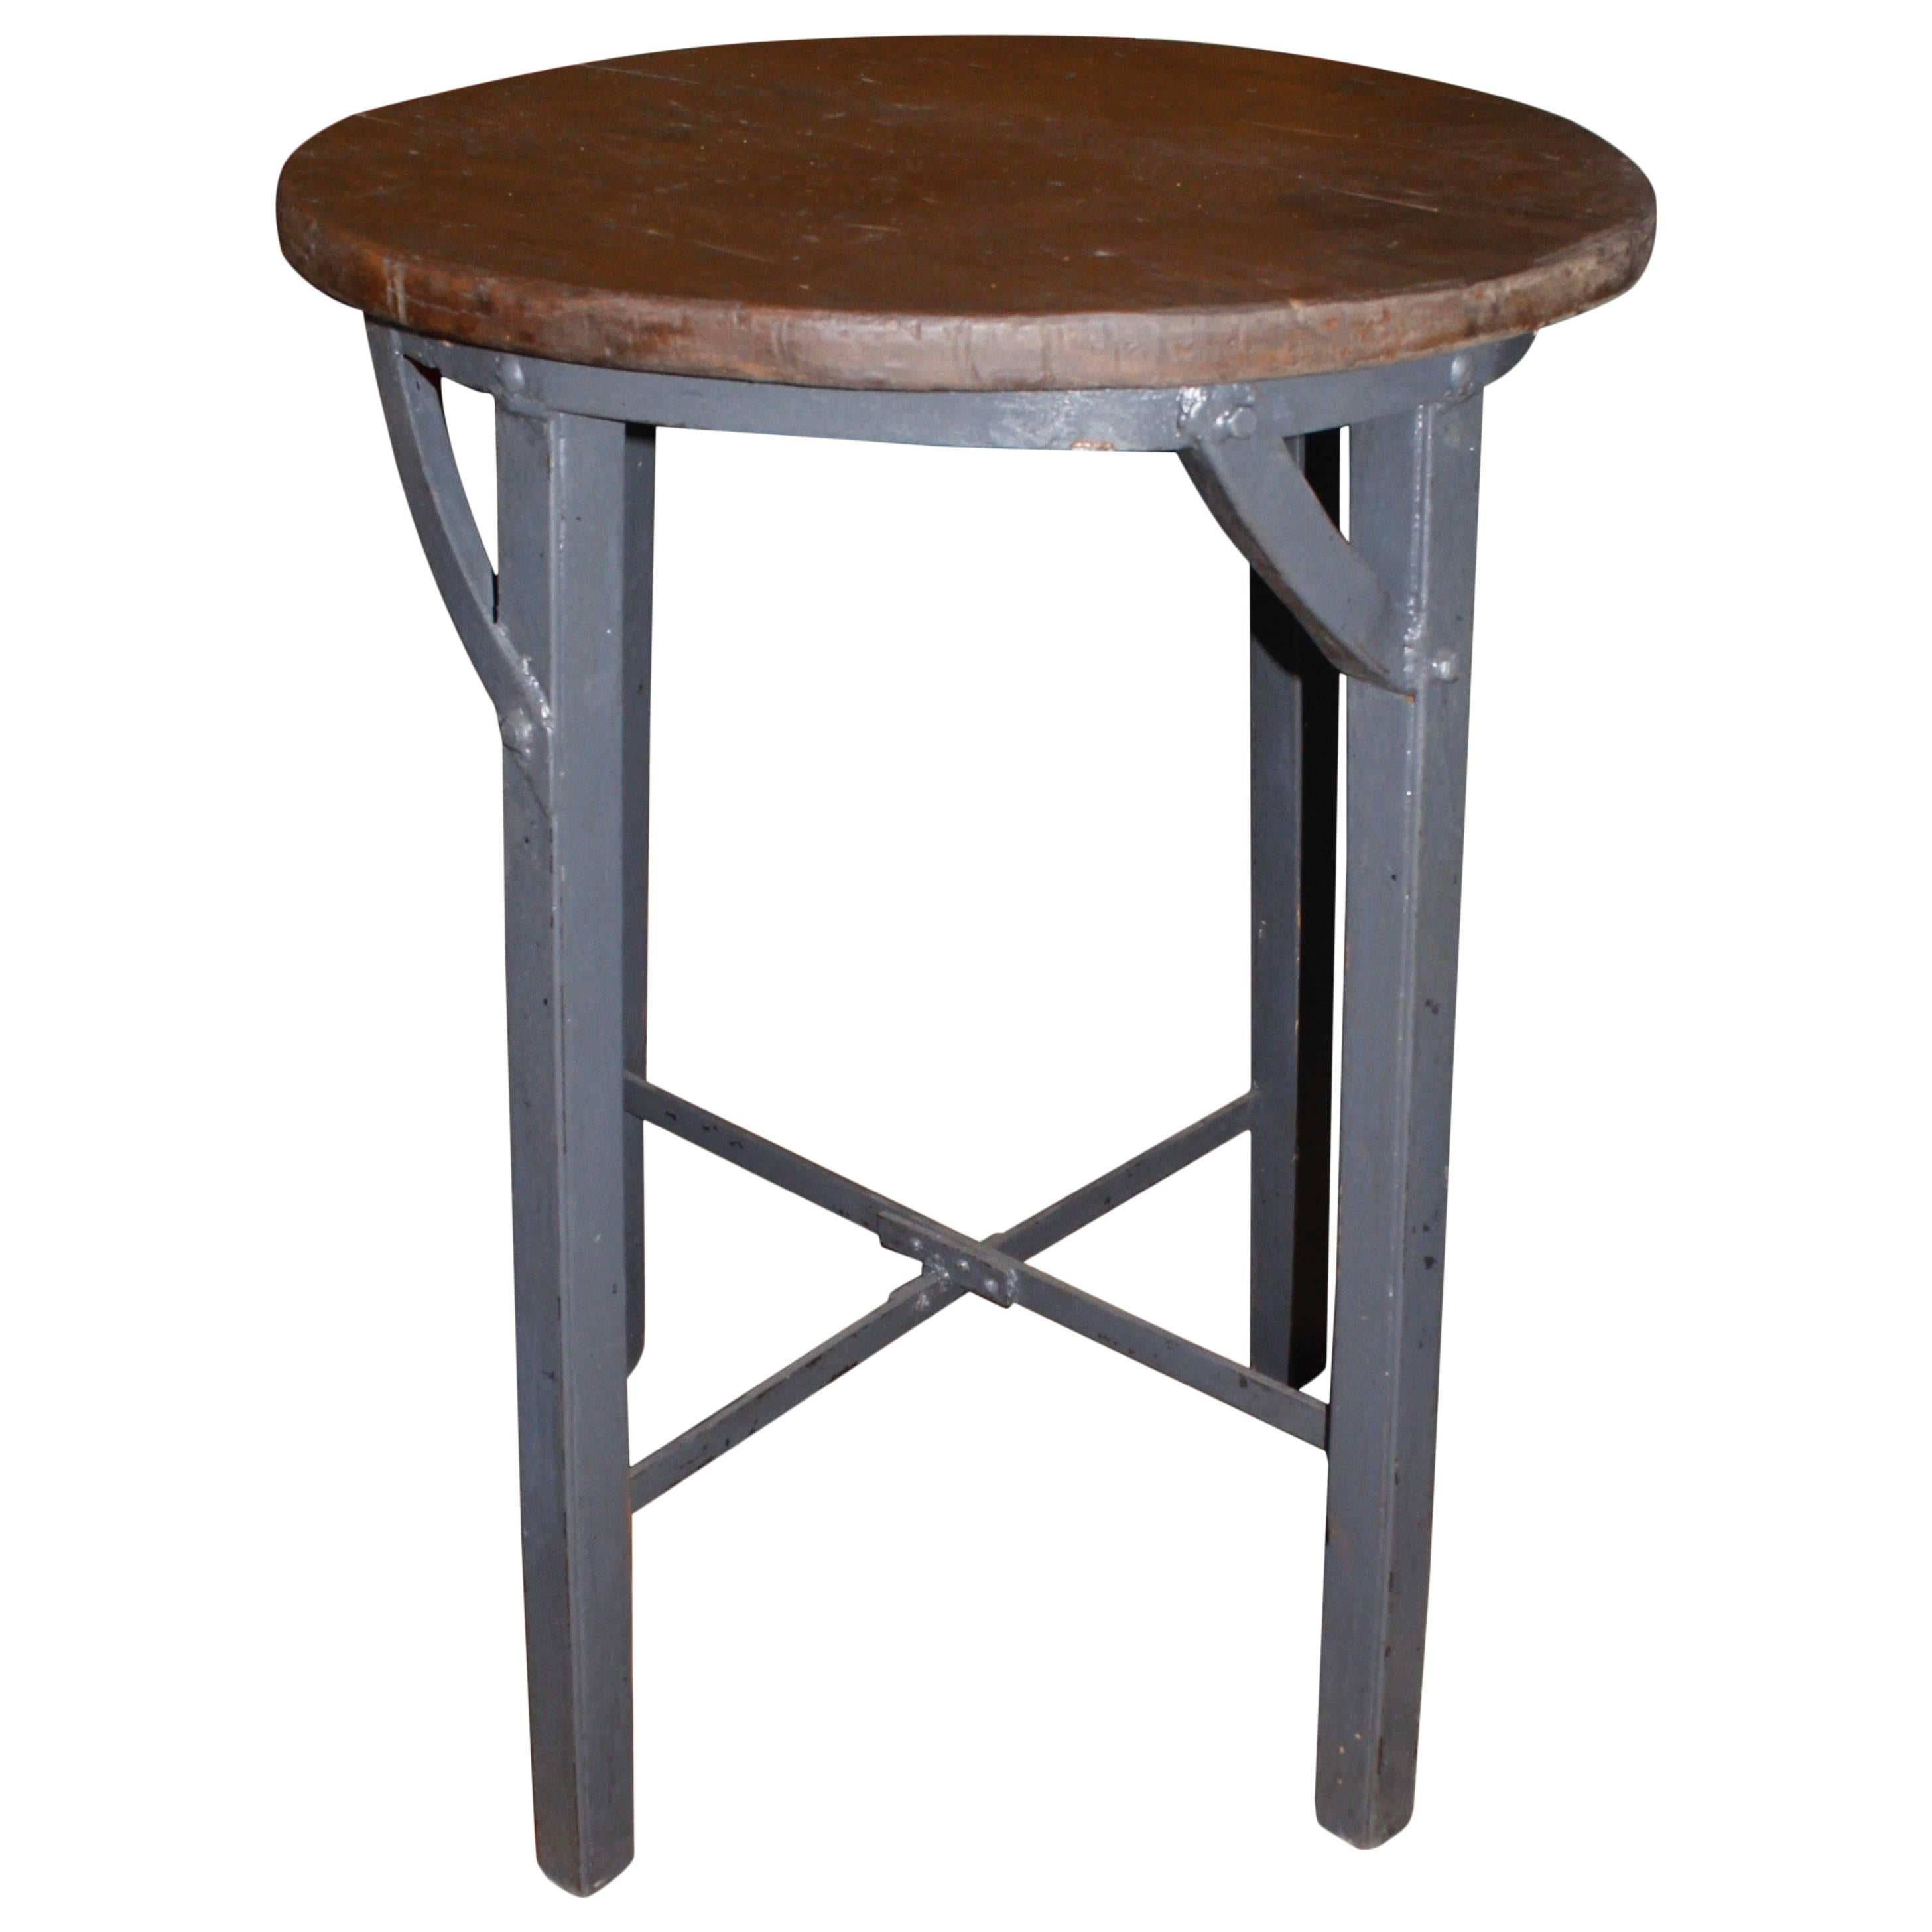 Unique Cafe Table Industrial For Sale